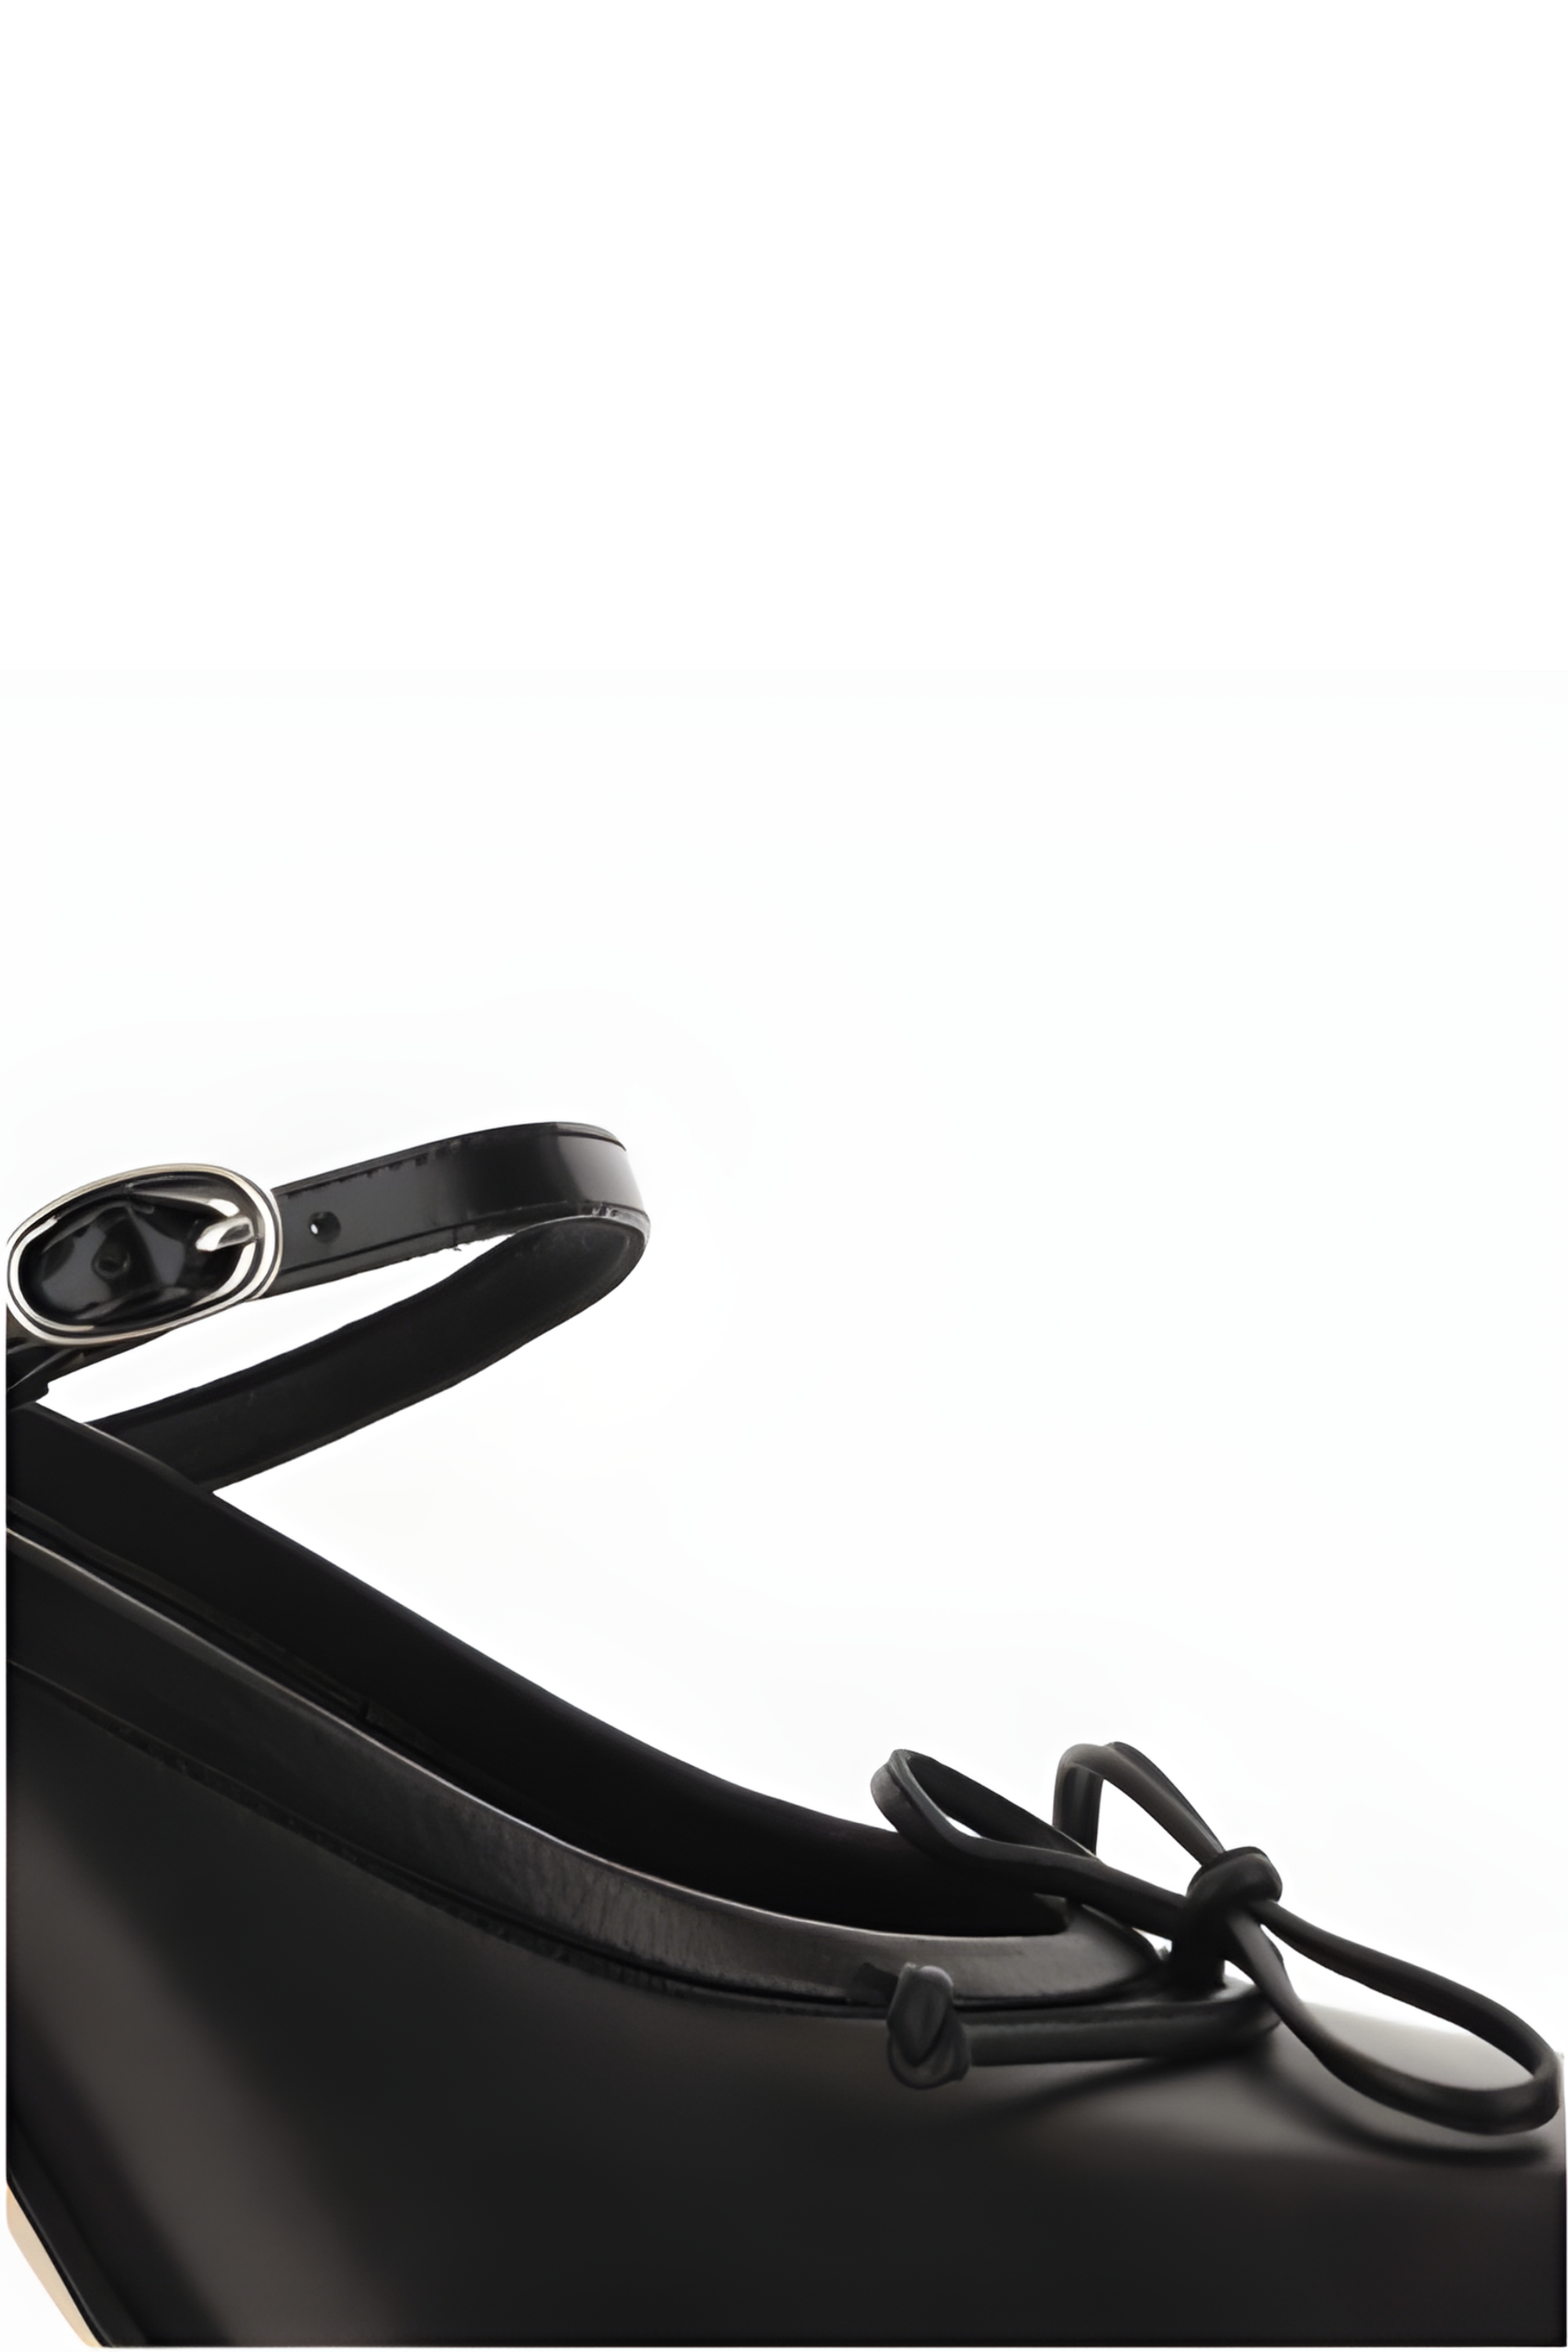 Herby Shoes - Black